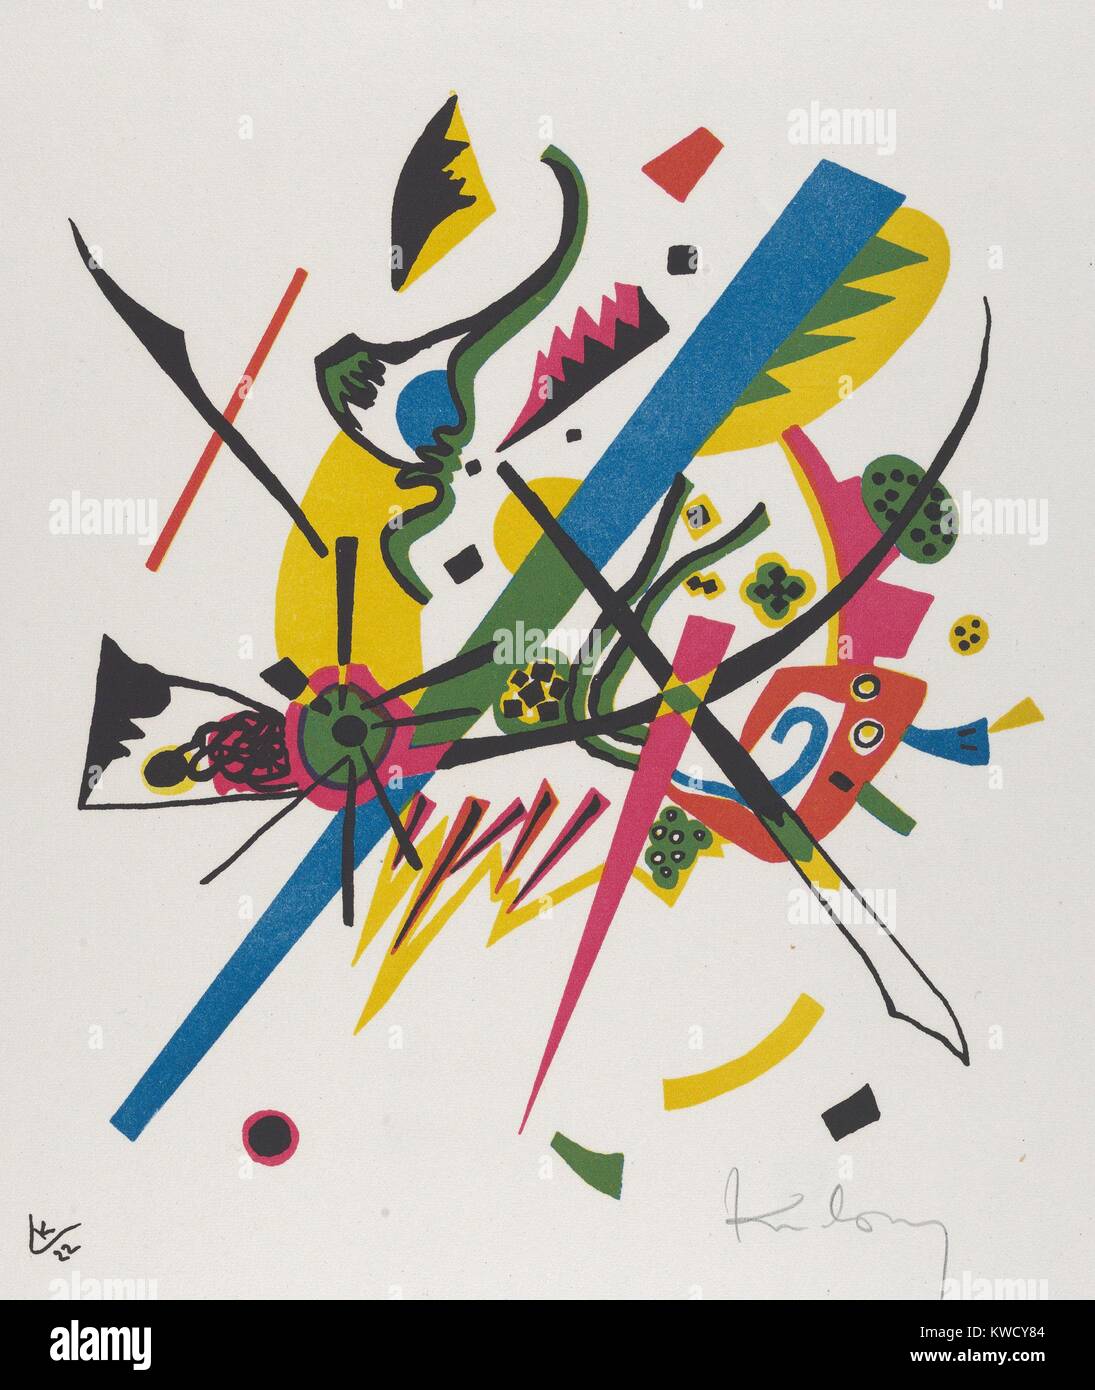 Kleine Welten I (Small Worlds I) by Vasily Kandinsky, 1922, Russian German Expressionist print. This lithograph was included in the artists 1922 portfolio. Each print presents an autonomous microcosm of self-contained entity (BSLOC 2017 5 145) Stock Photo